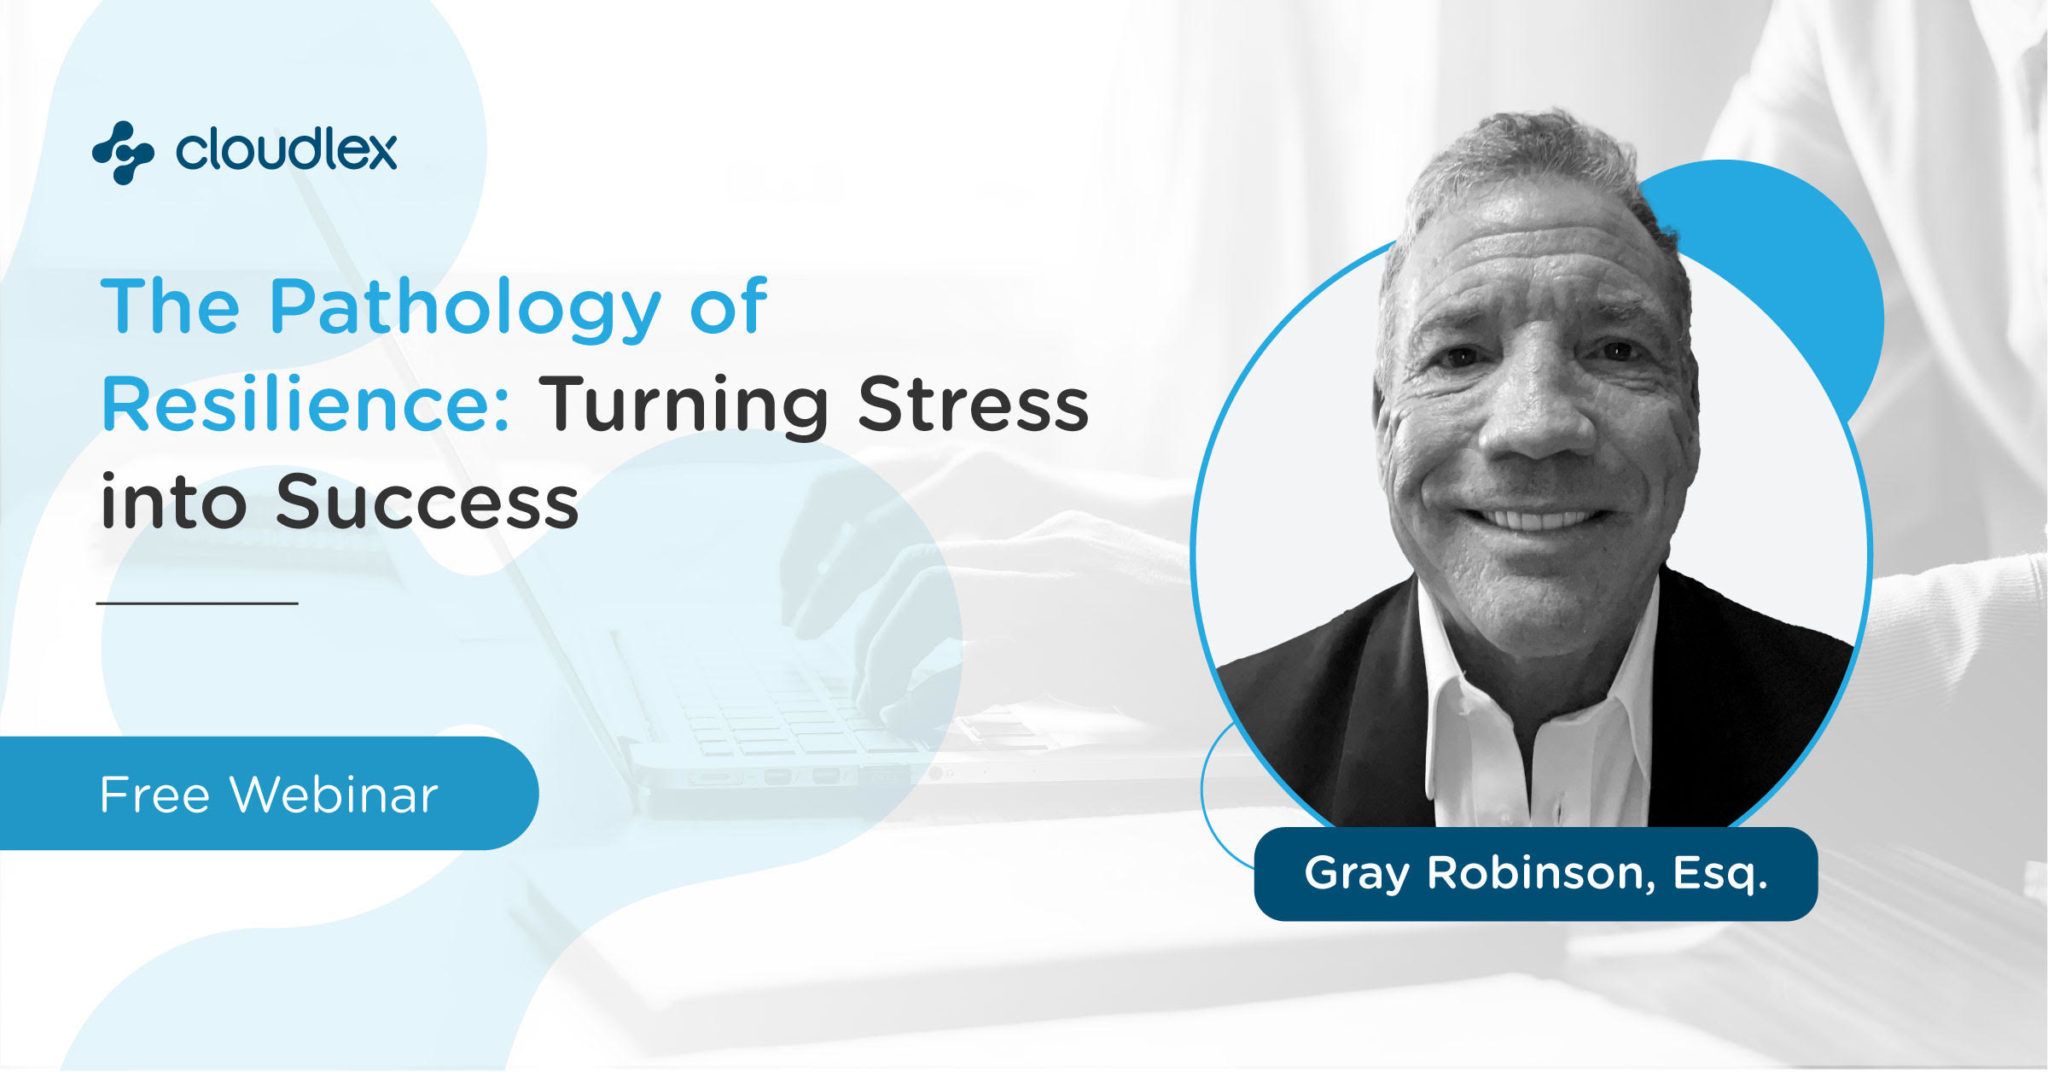 “The Pathology of Resilience: Turning Stress into Success”